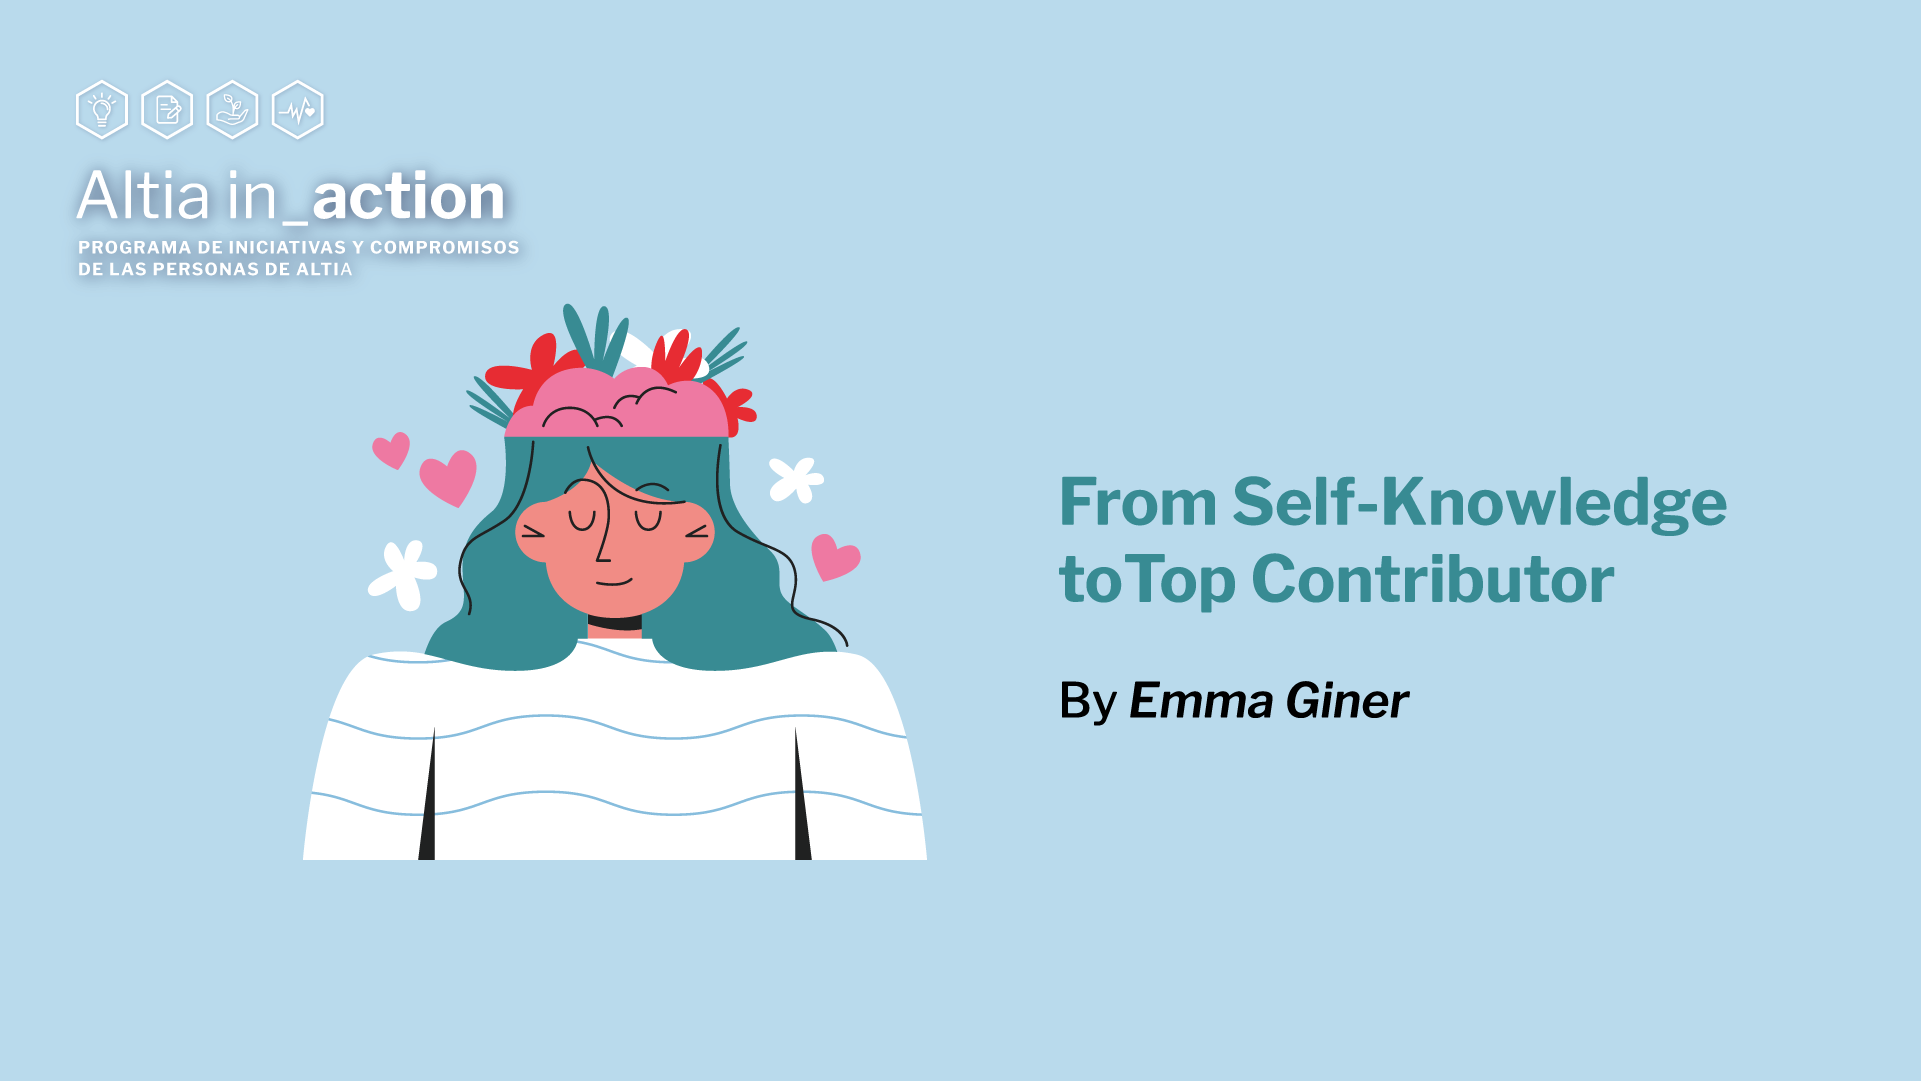 From Self-Knowledge to Top Contributor